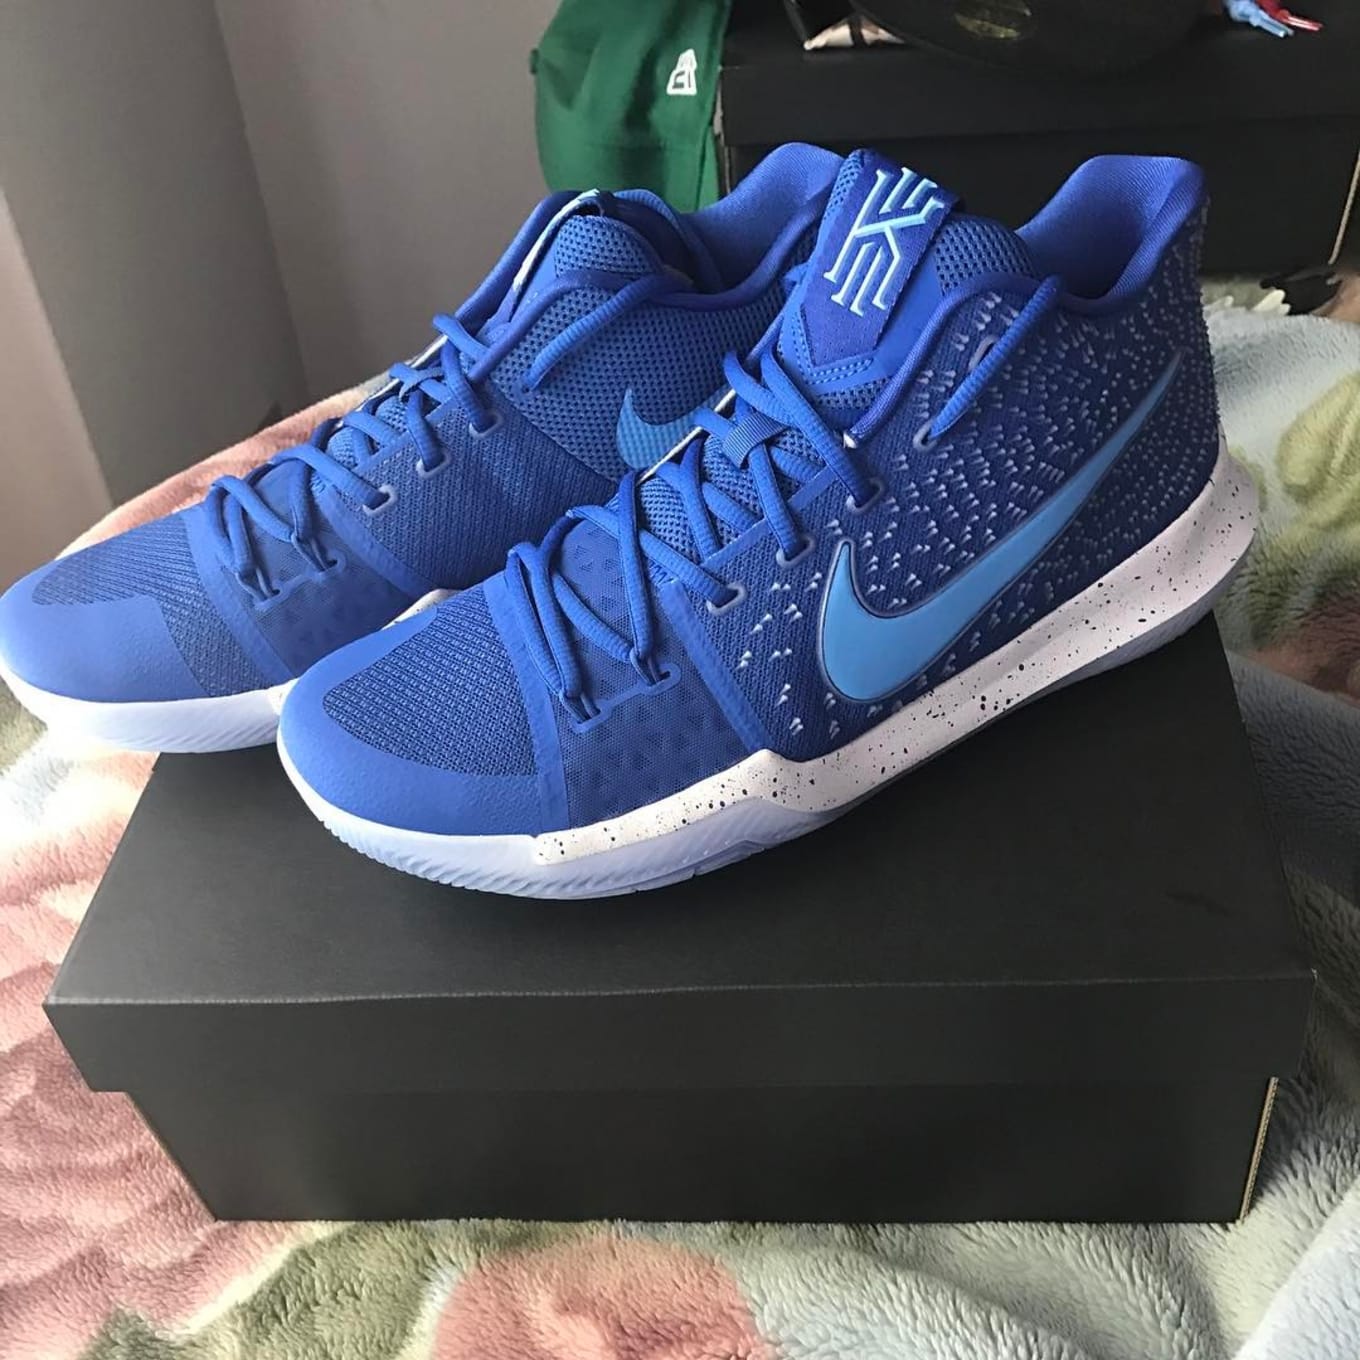 The Best Nike Kyrie 3 Designs Sole Collector